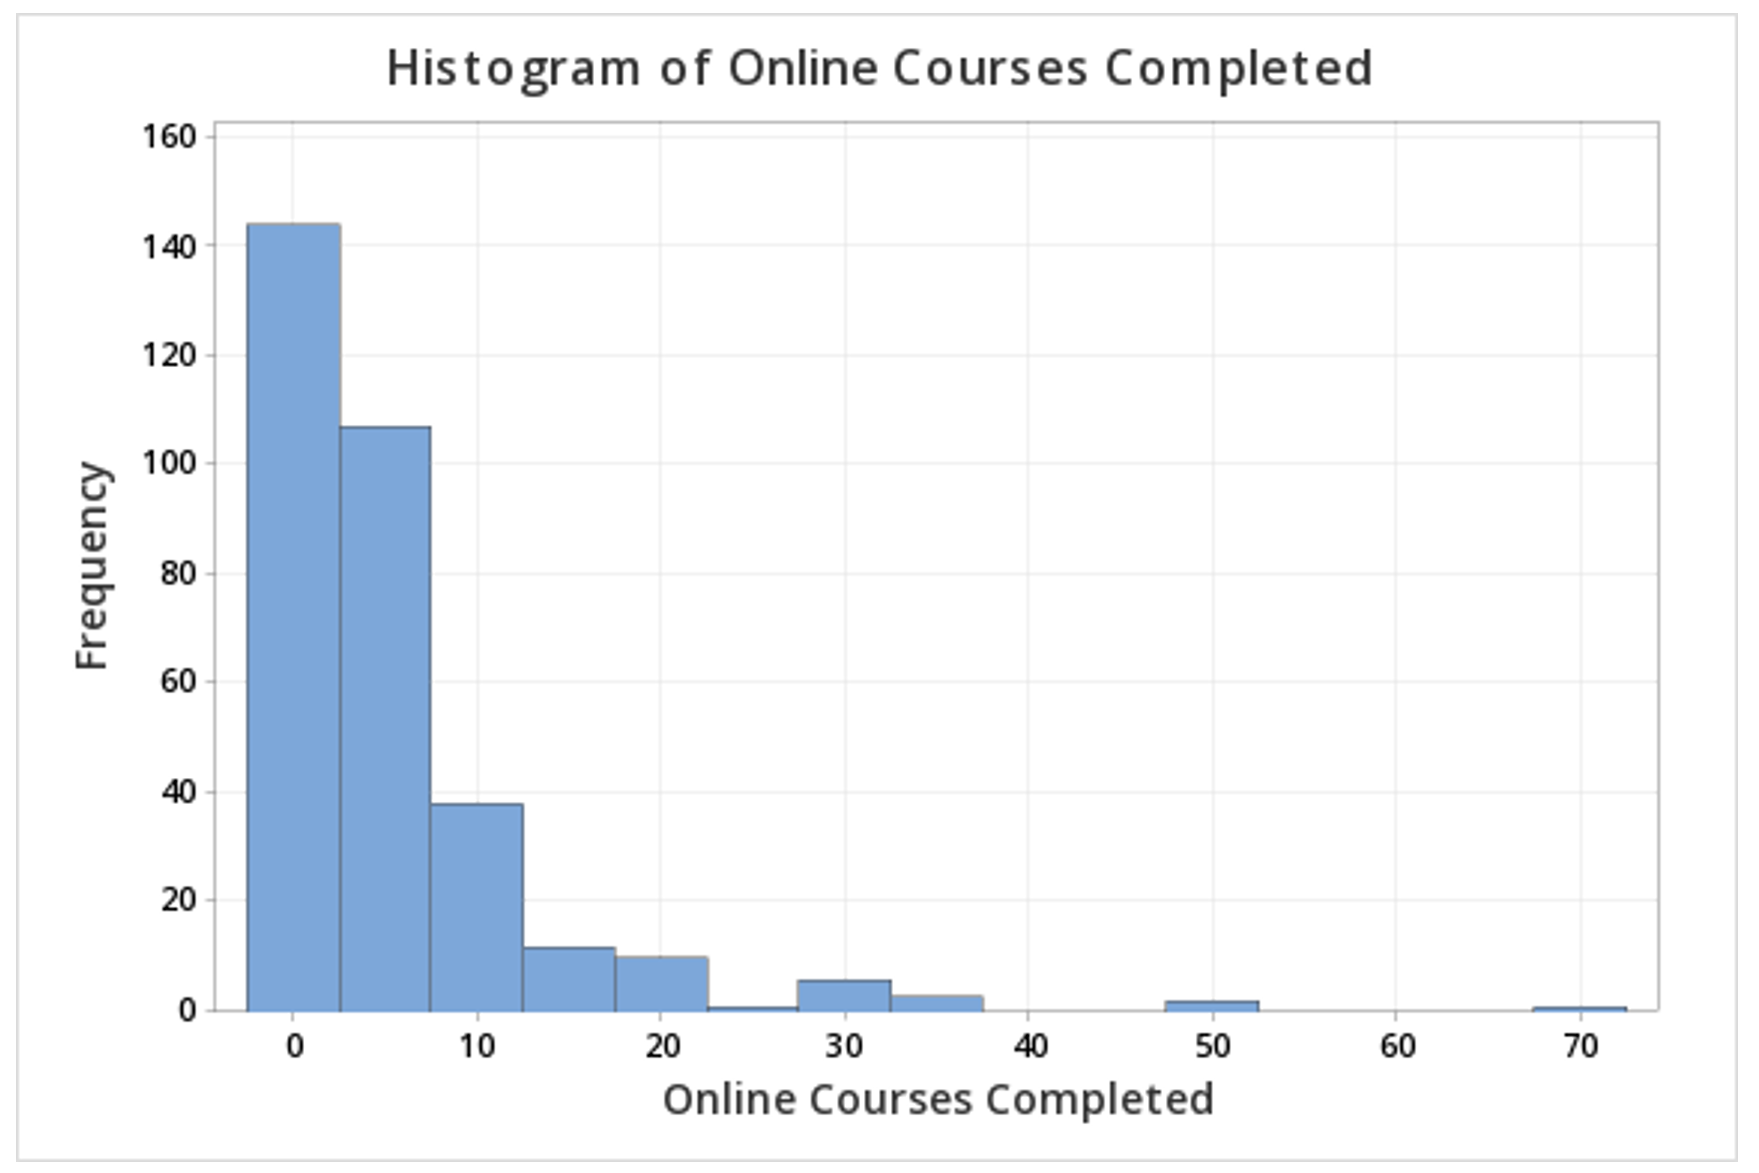 Histogram of online courses completed